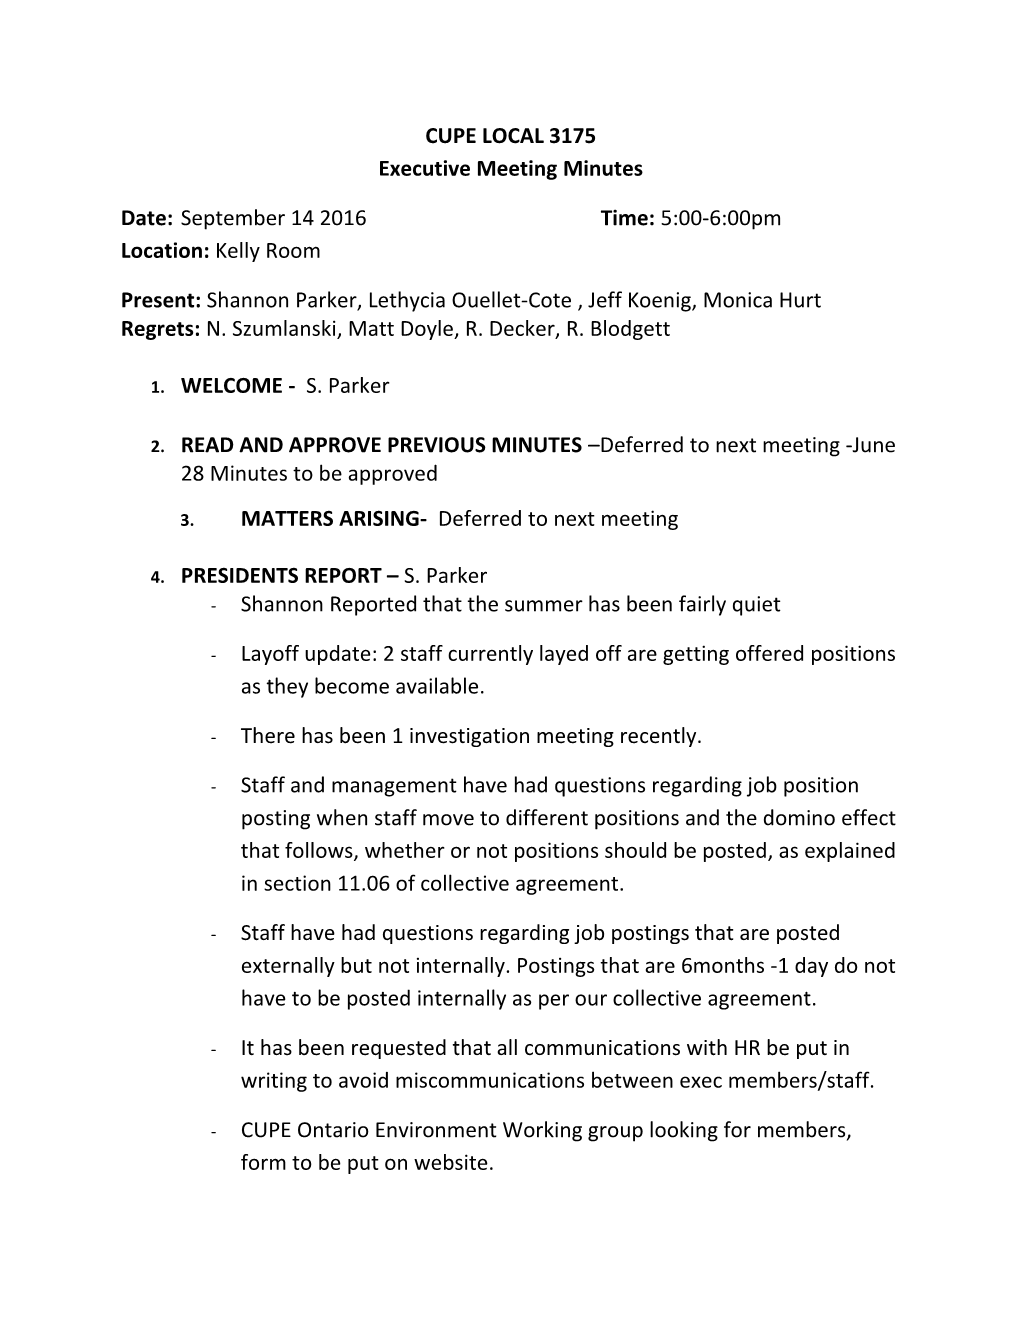 CUPE LOCAL 3175 Executive Meeting Minutes